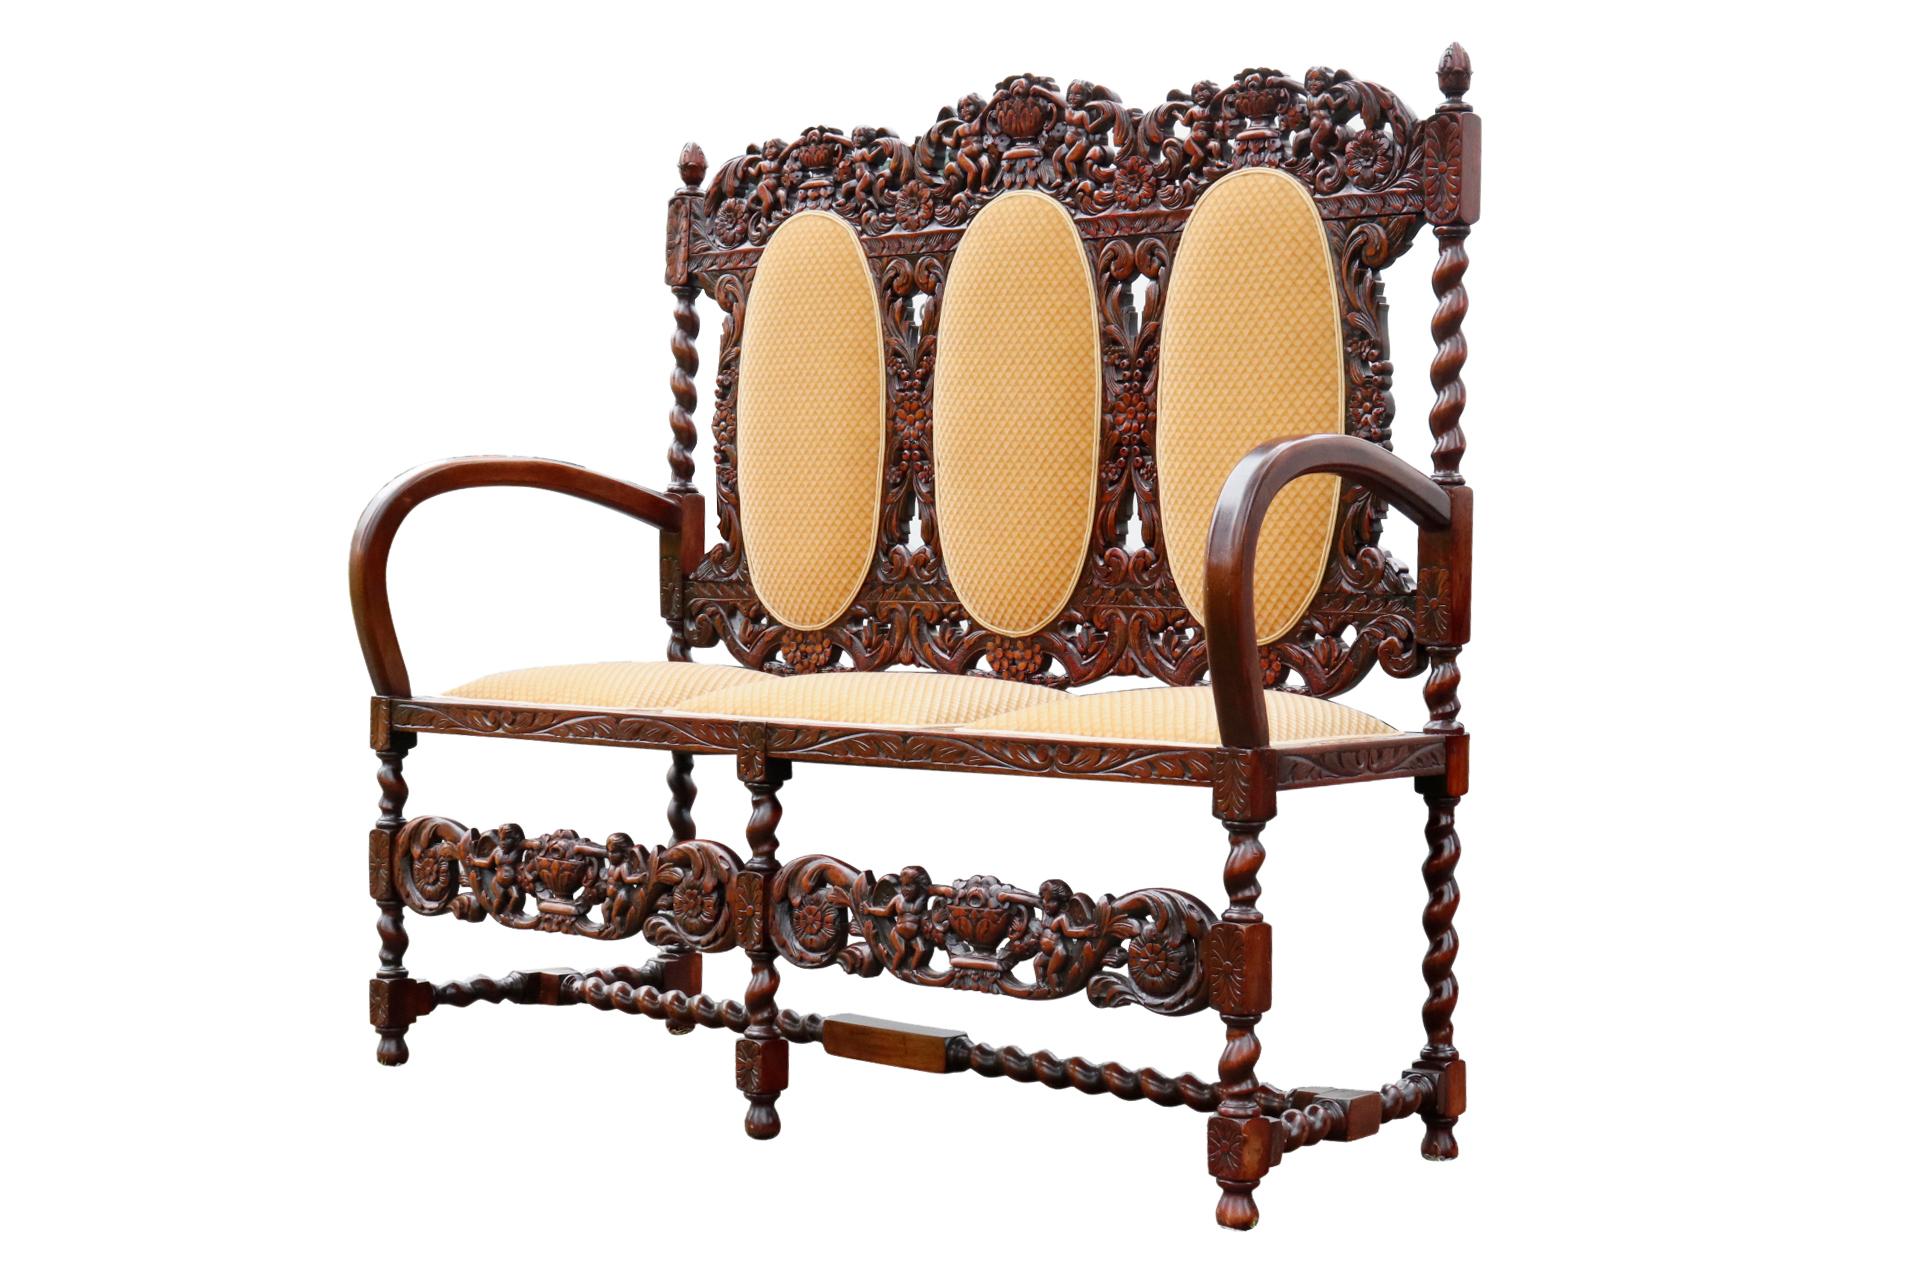 A richly carved Jacobean three seat settee made of oak. Square seat cushions and oval back cushions are upholstered in a traditional diamond cut yellow velvet. The seat back is carved with scrolled acanthus leaves and berry trimmed rosettes,